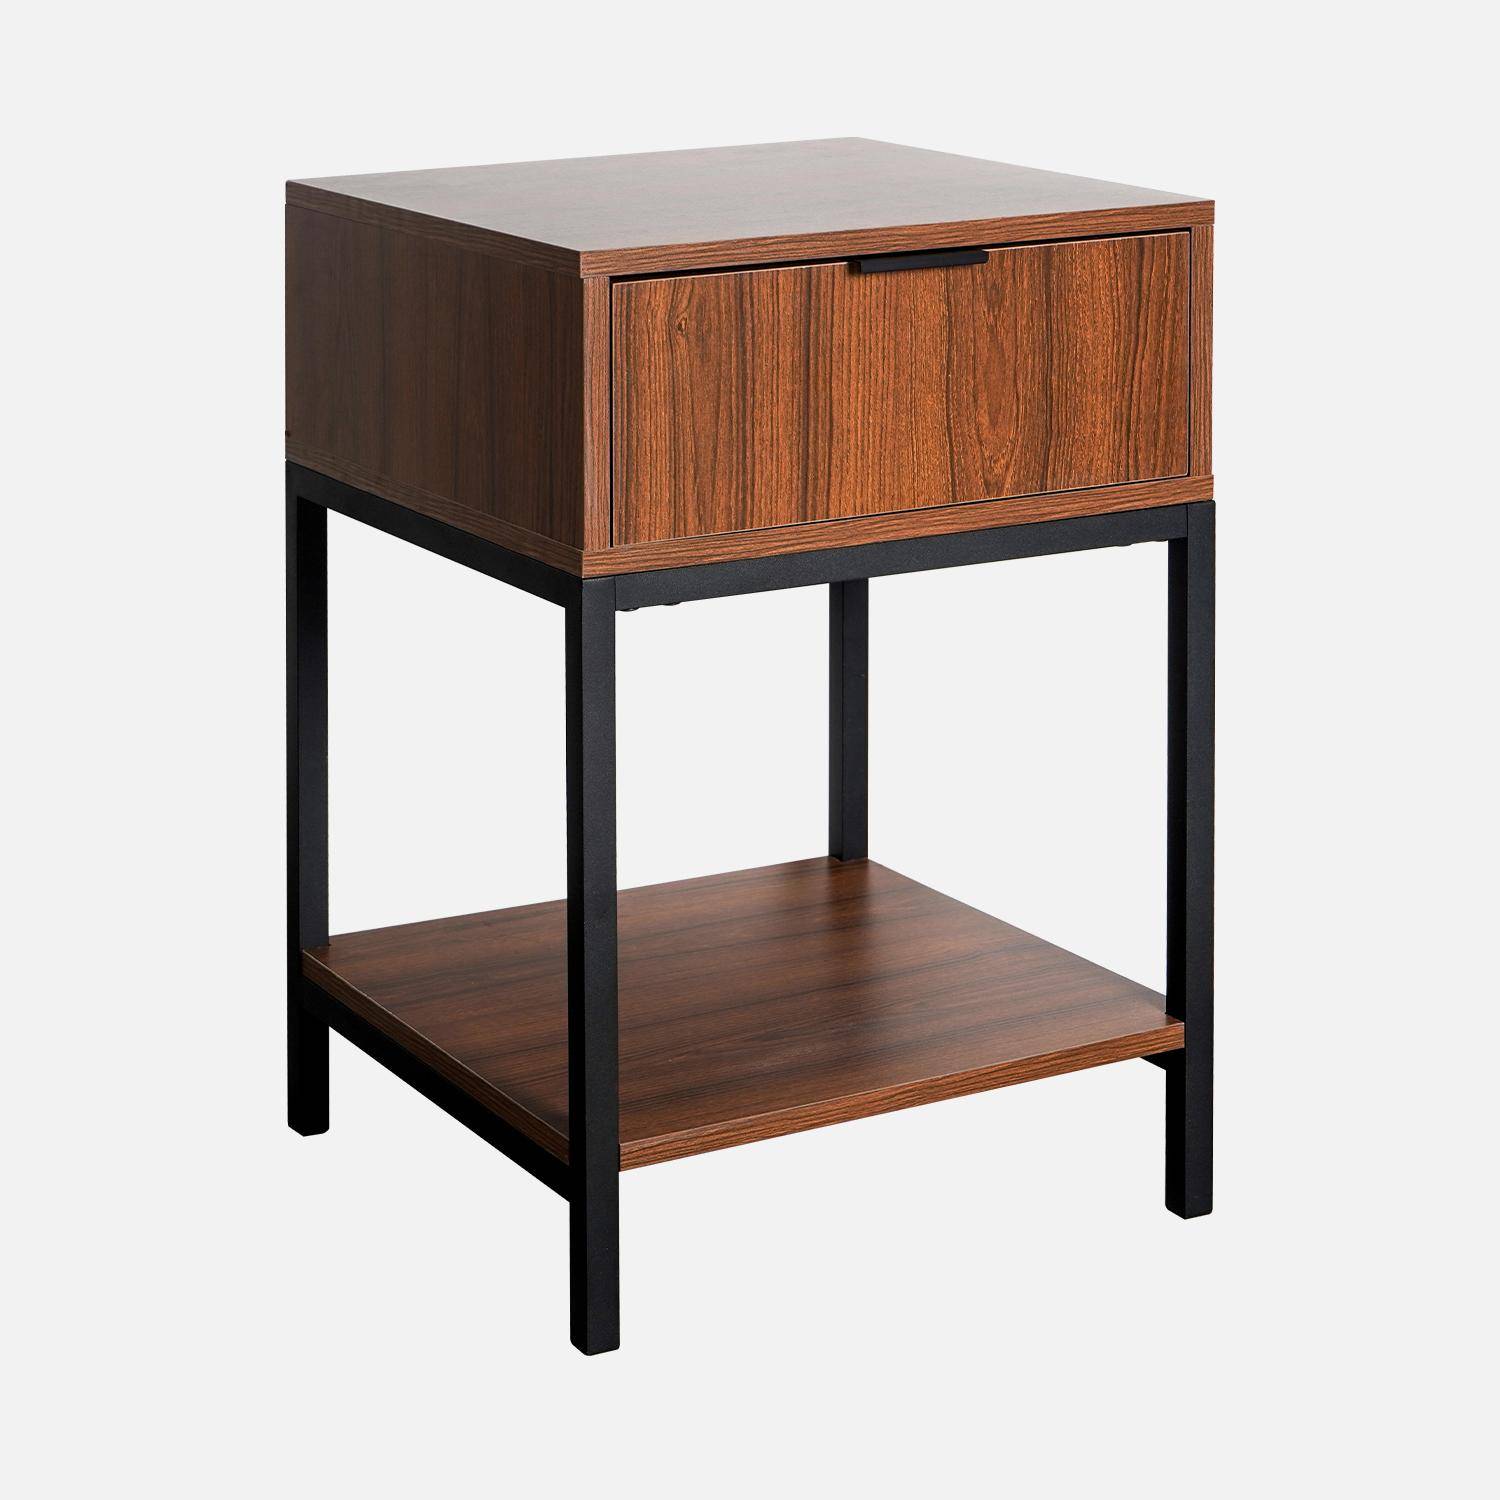 Walnut-coloured bedside table with black metal legs and handle - 1 drawer and 1 shelf Photo2